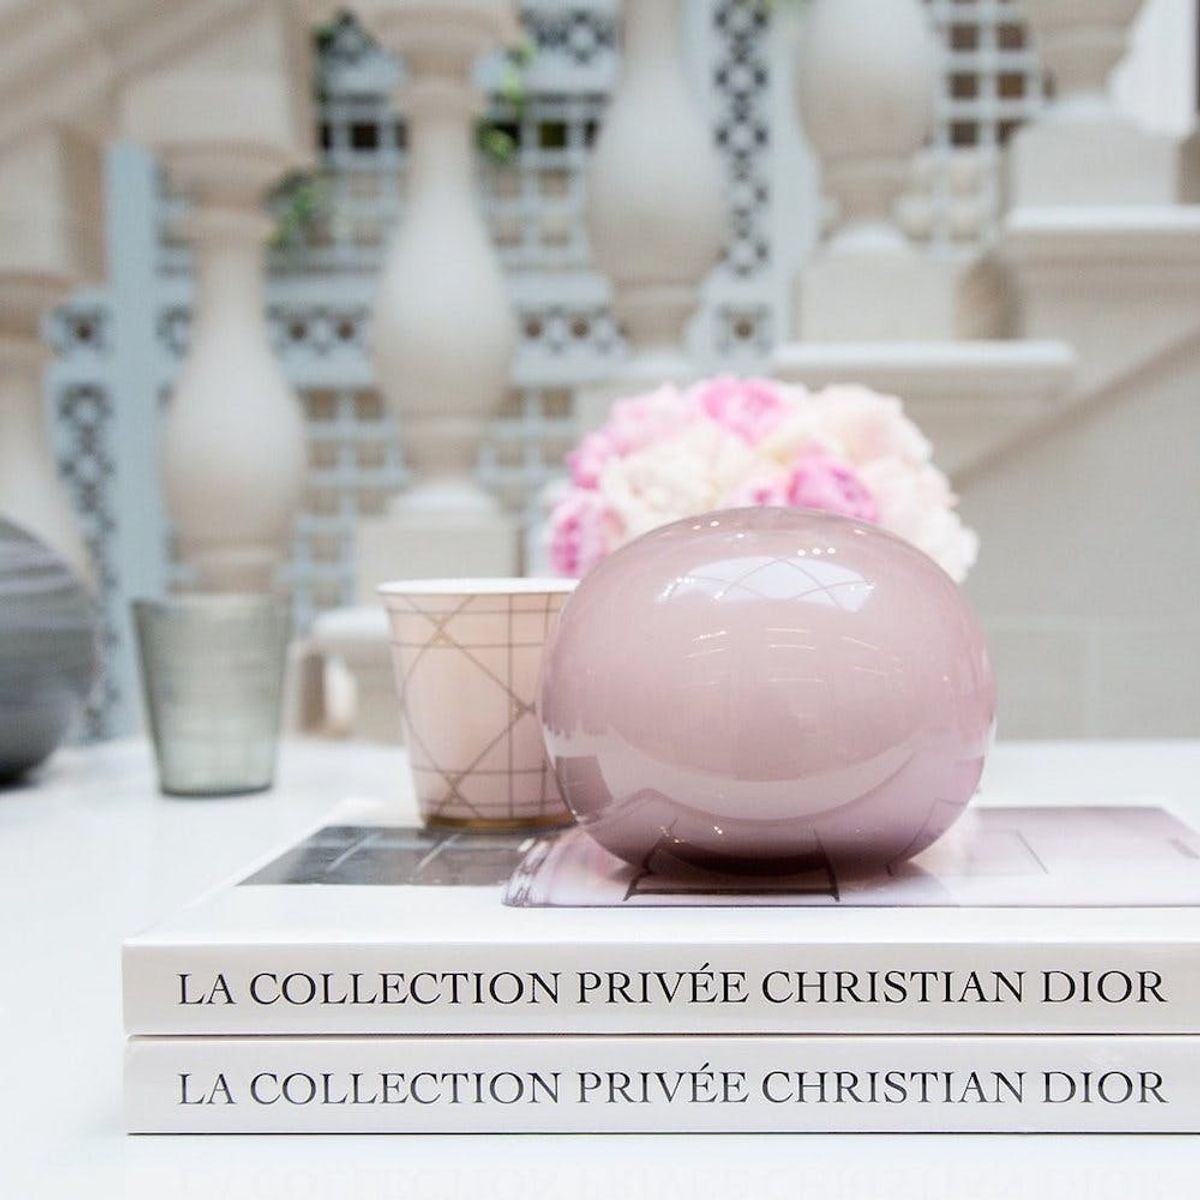 Fashion Mavens Rejoice! Dior Just Launched a Home Collection